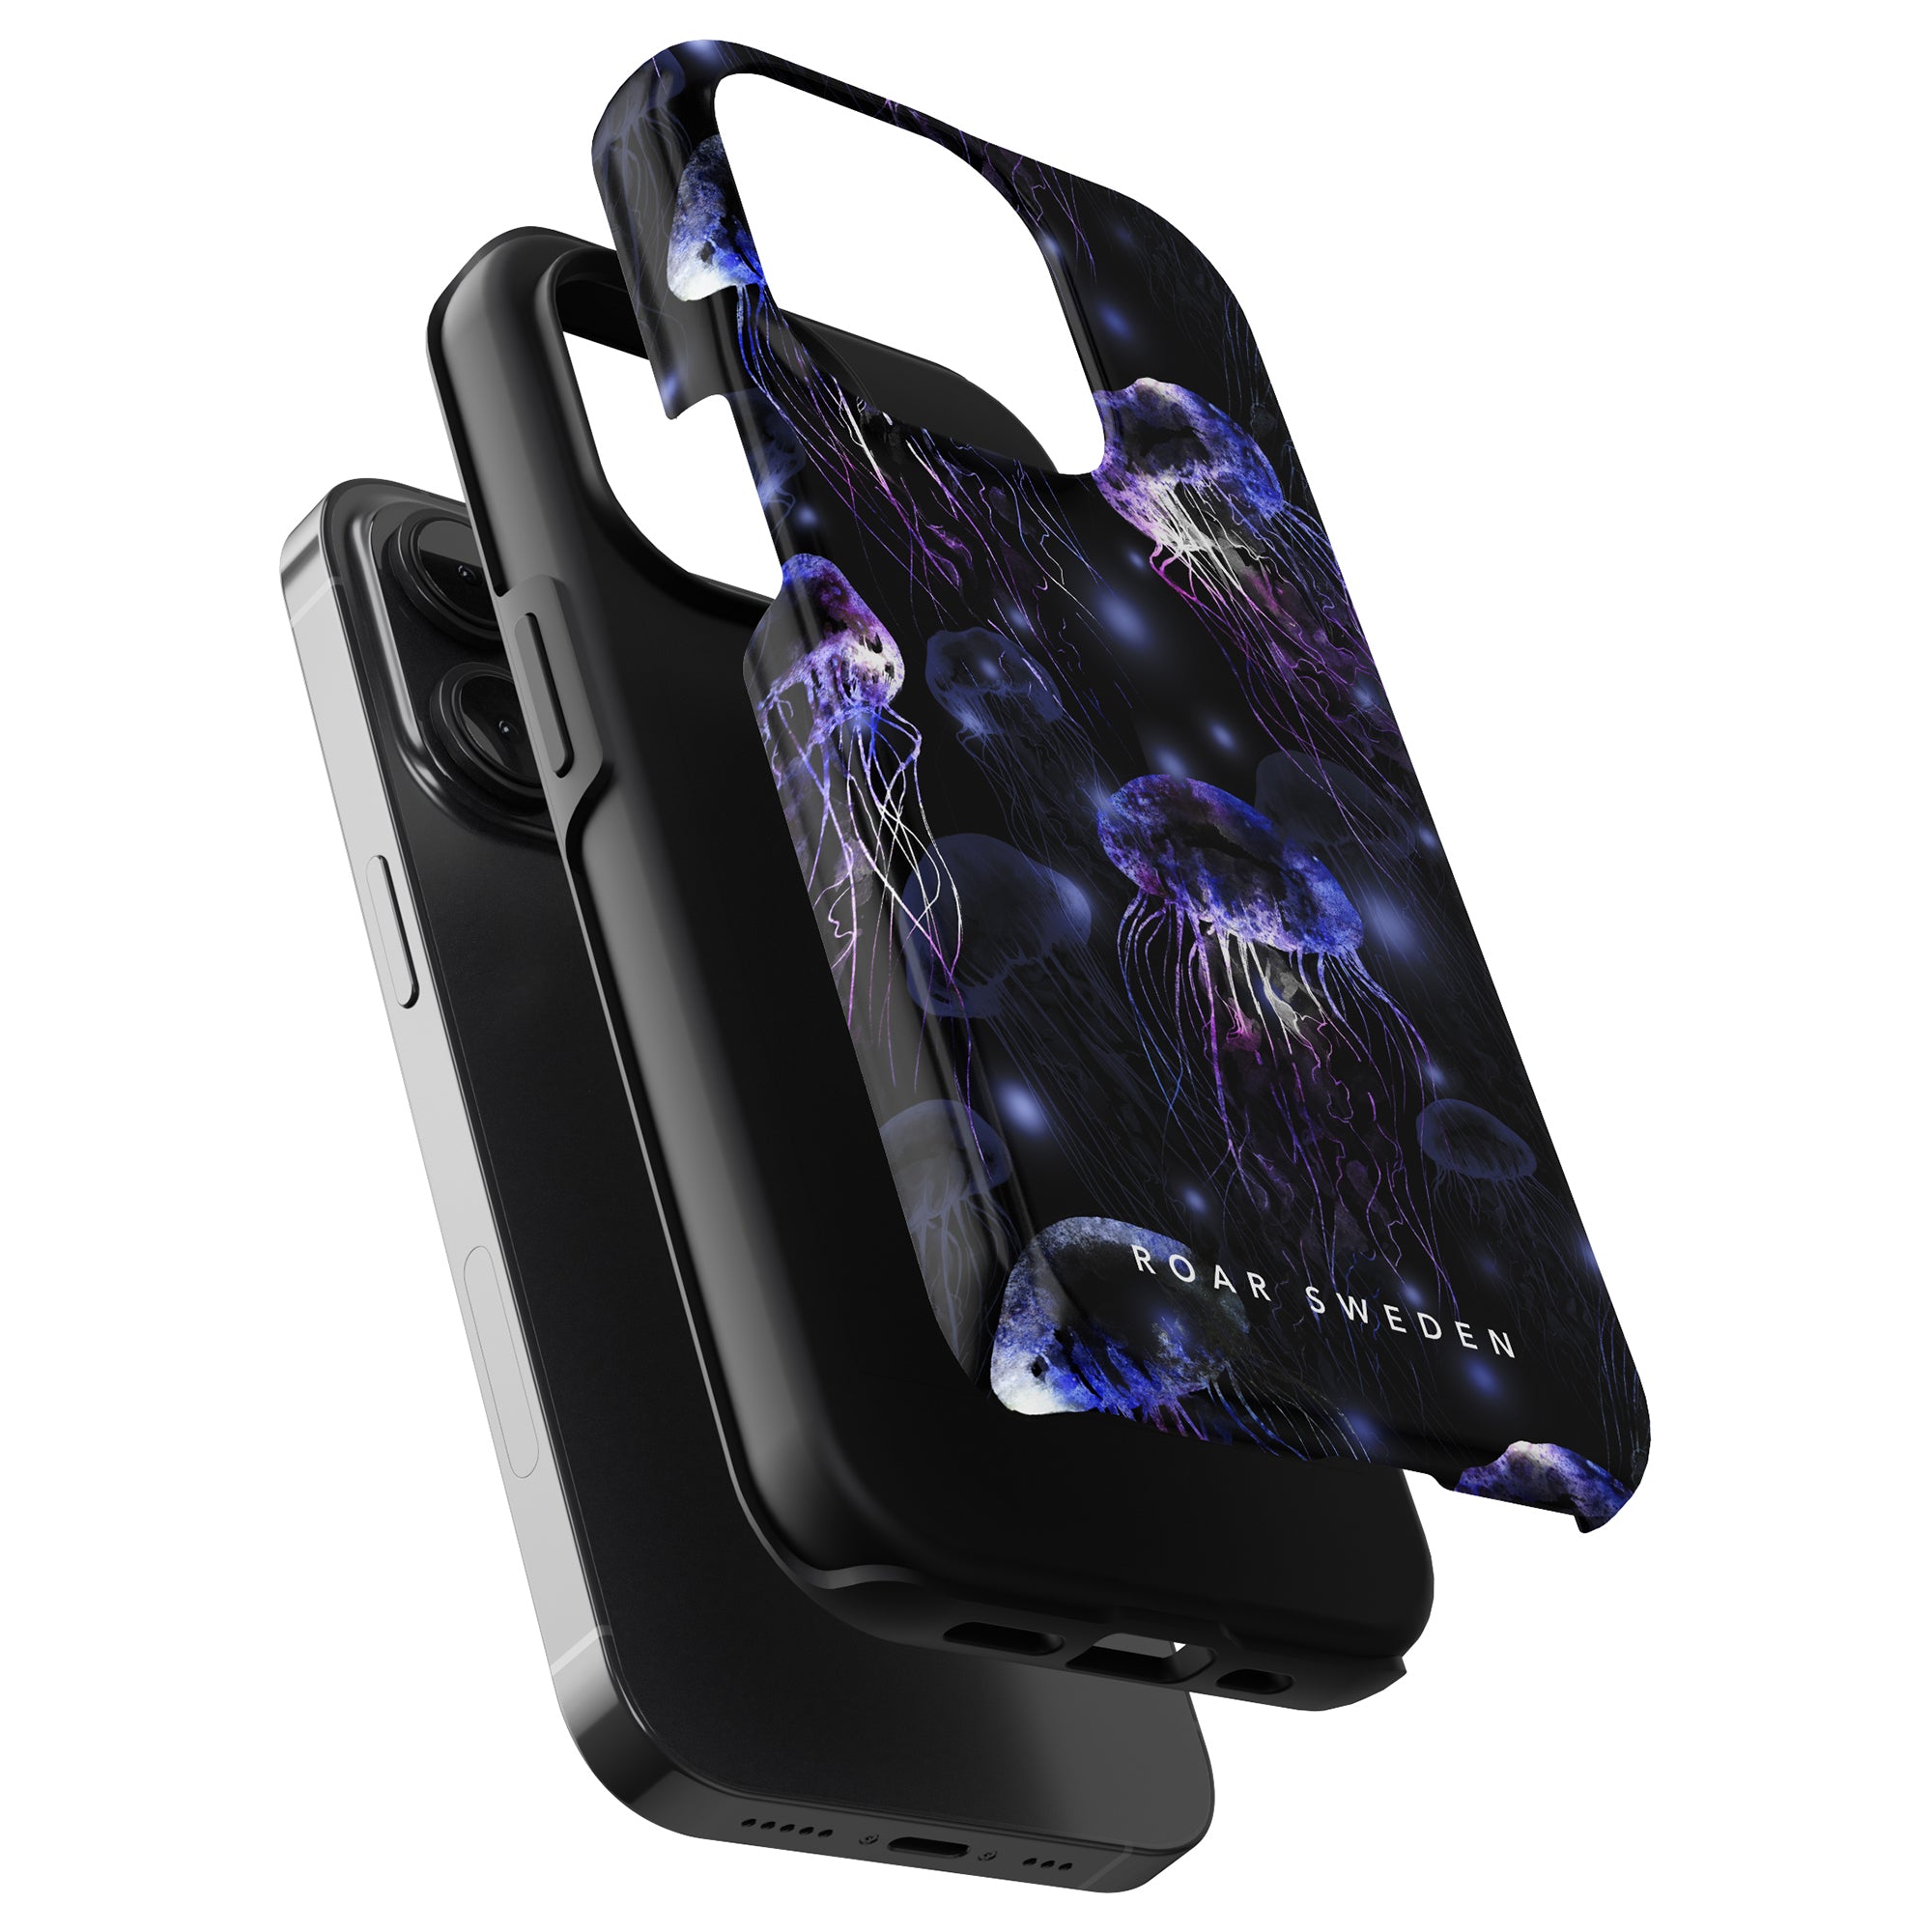 A Smack - Tough Case with a bioluminescent jellyfish design on a seamless background, showcasing purple and blue hues, and labeled "ideal of sweden.